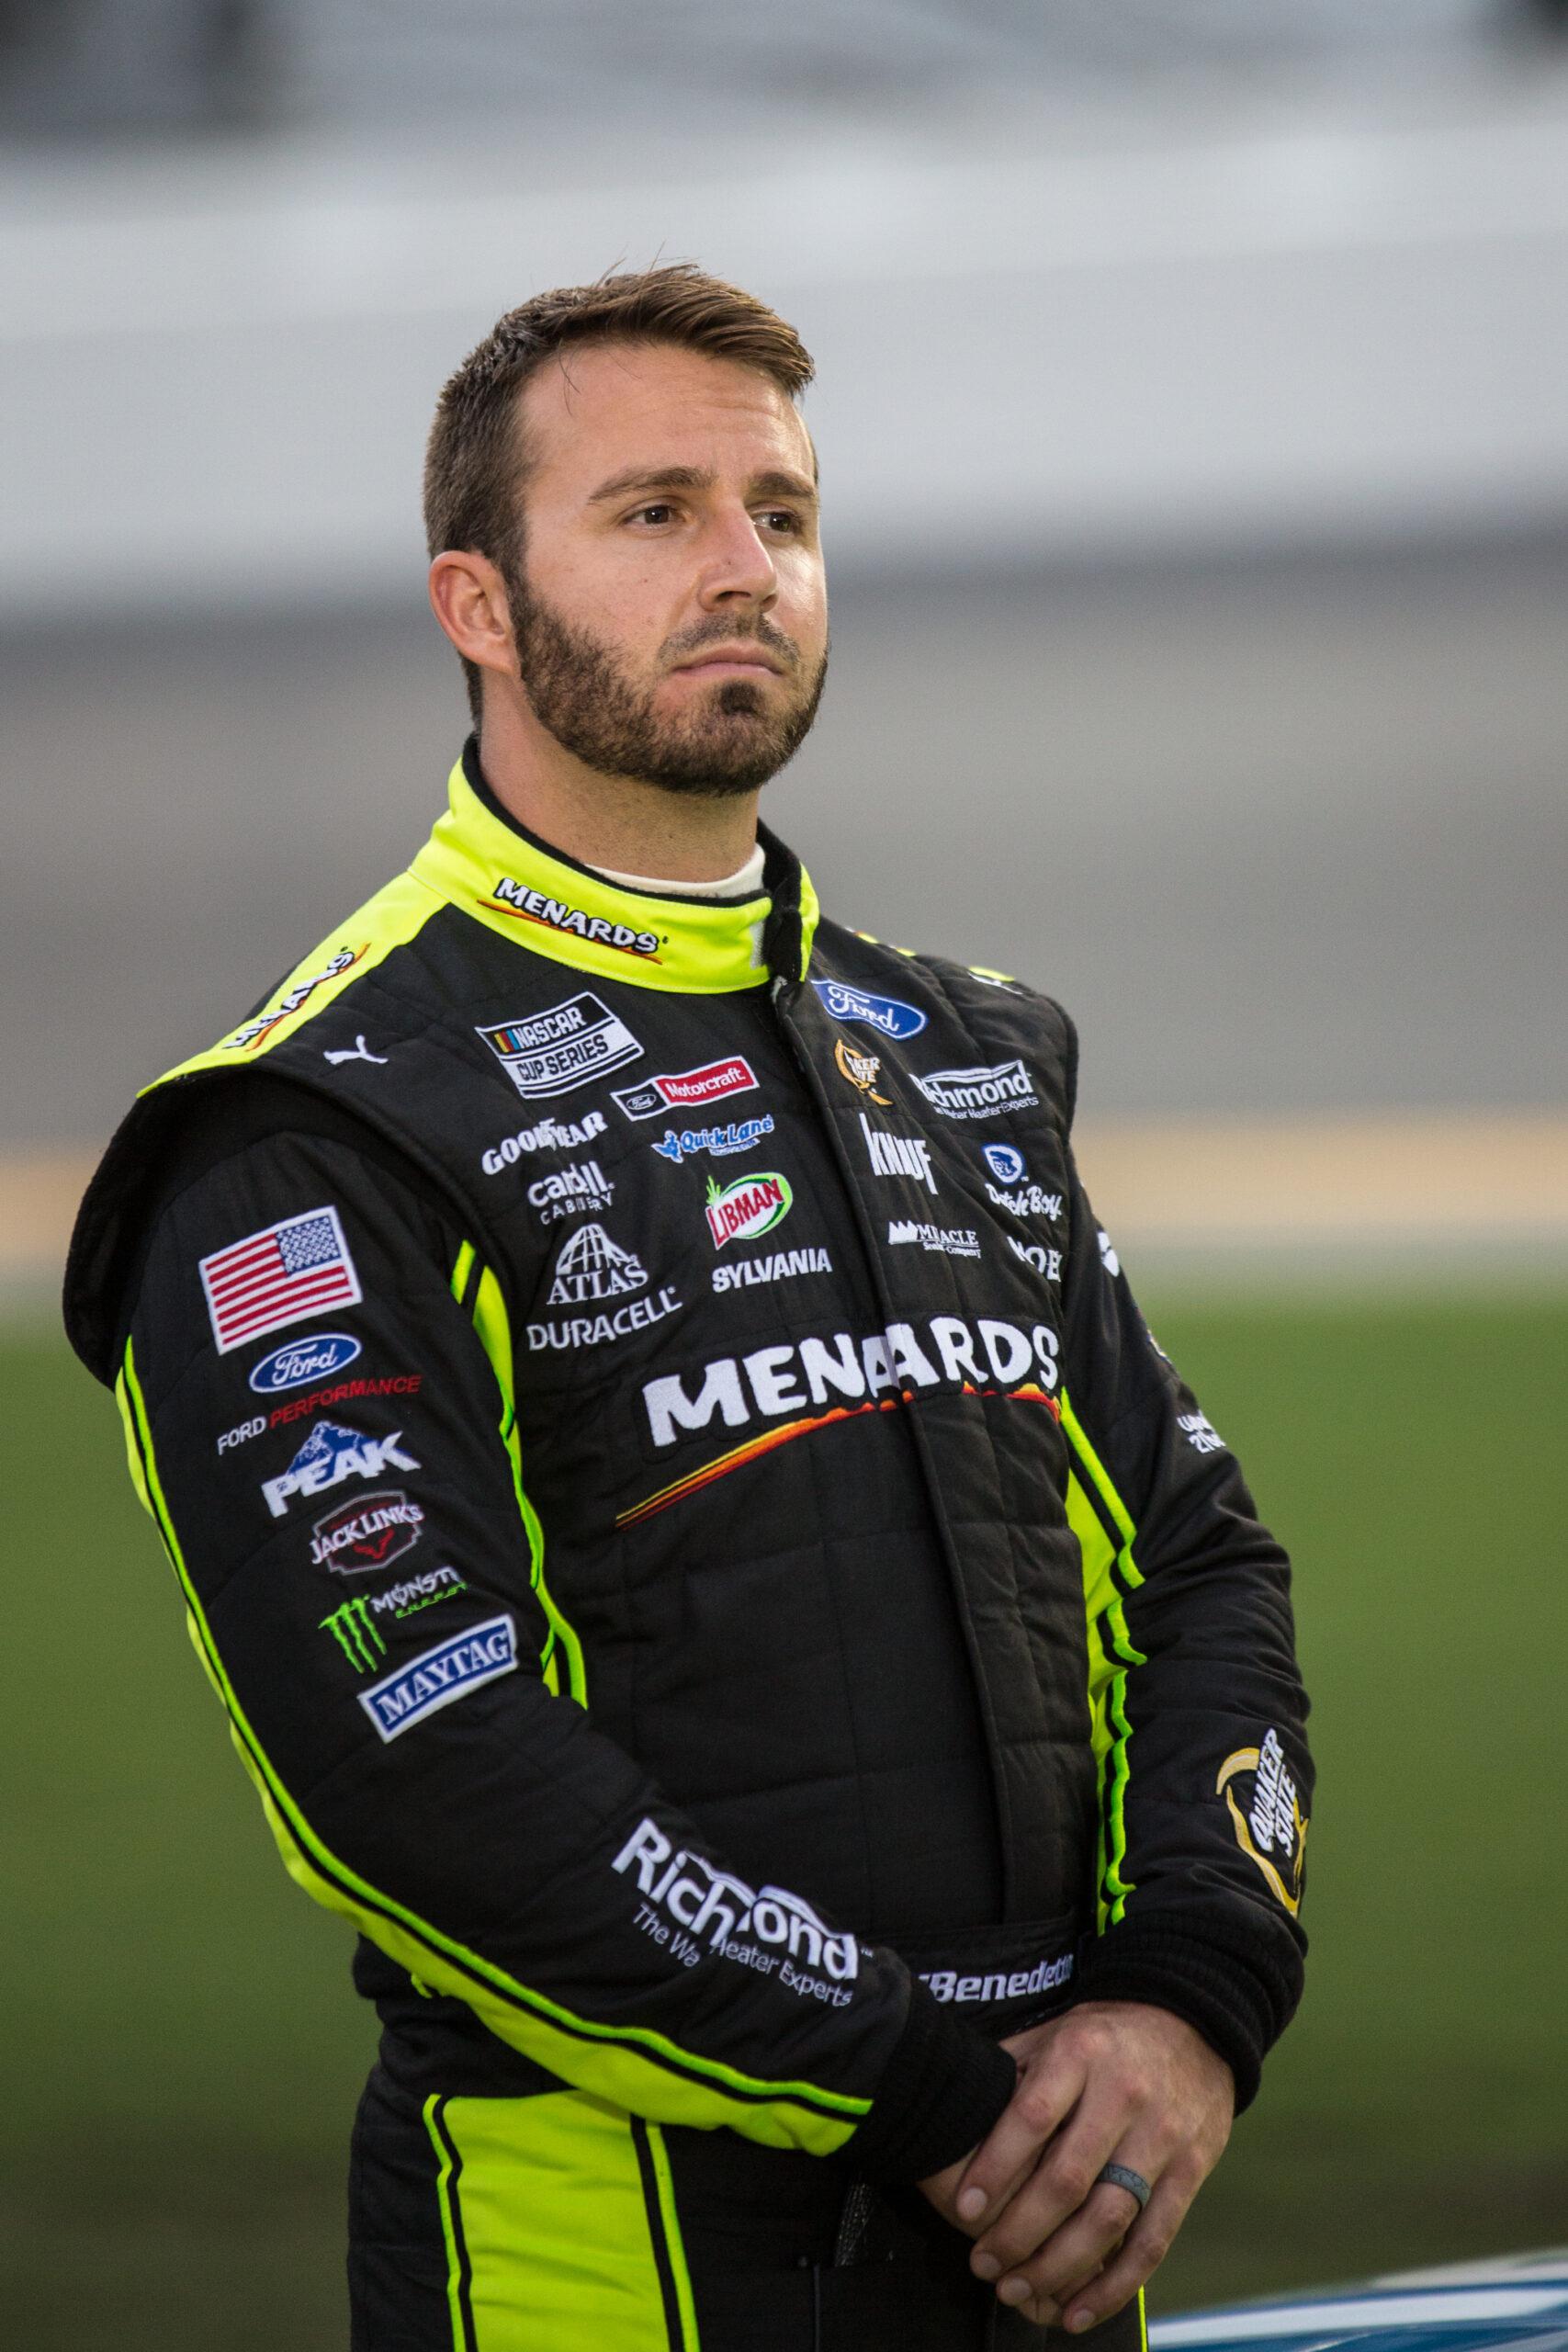 While Matt DiBenedetto faces an uncertain future, he hopes to win the 100th Cup race for the No. 21 Wood Brothers Racing team. (Photo: Jonathan Huff | The Podium Finish)